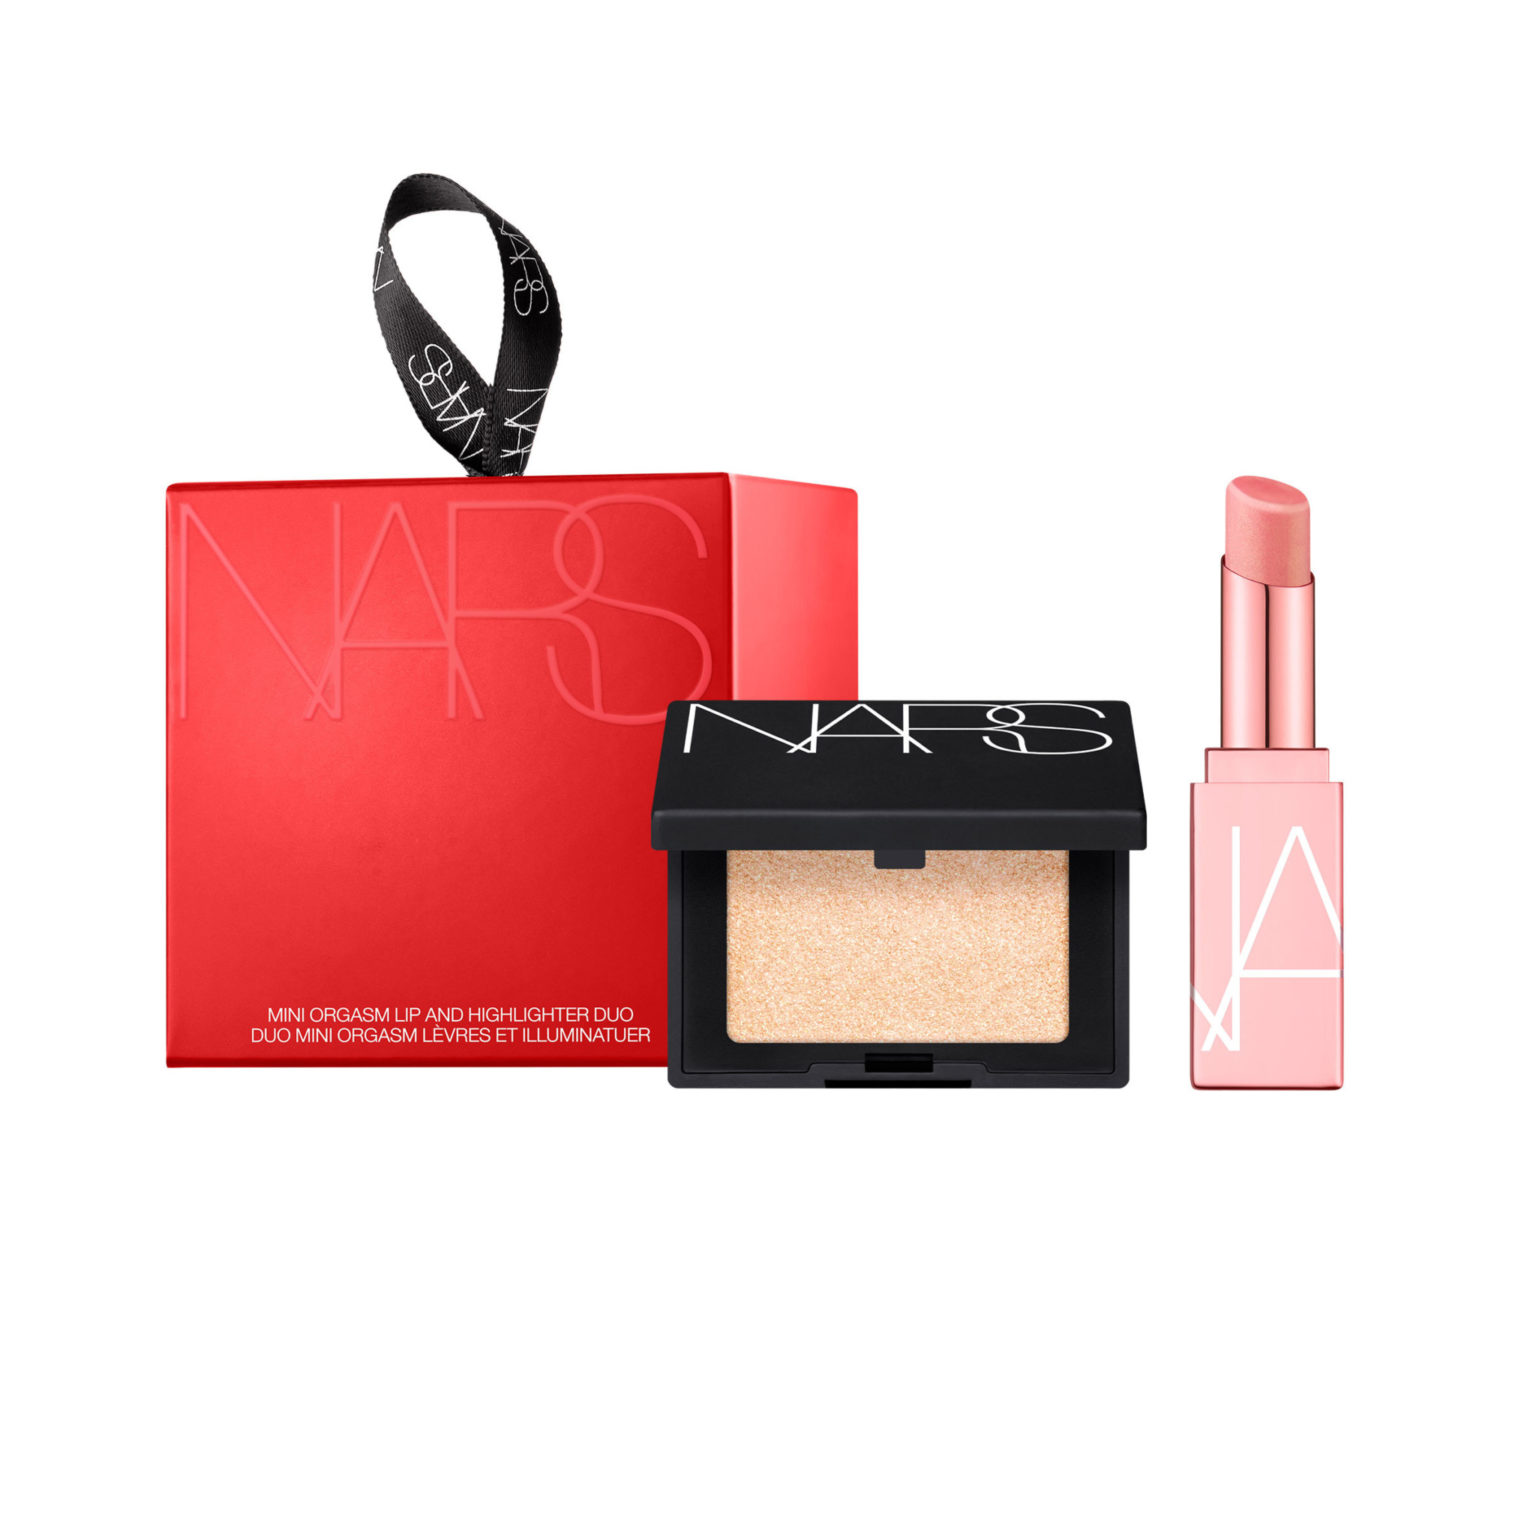 NARS_HO20_Holiday_PDPCrop_Soldier_CRTN_MiniOrgasmLip-HighlighterDuo_GLBL_Square